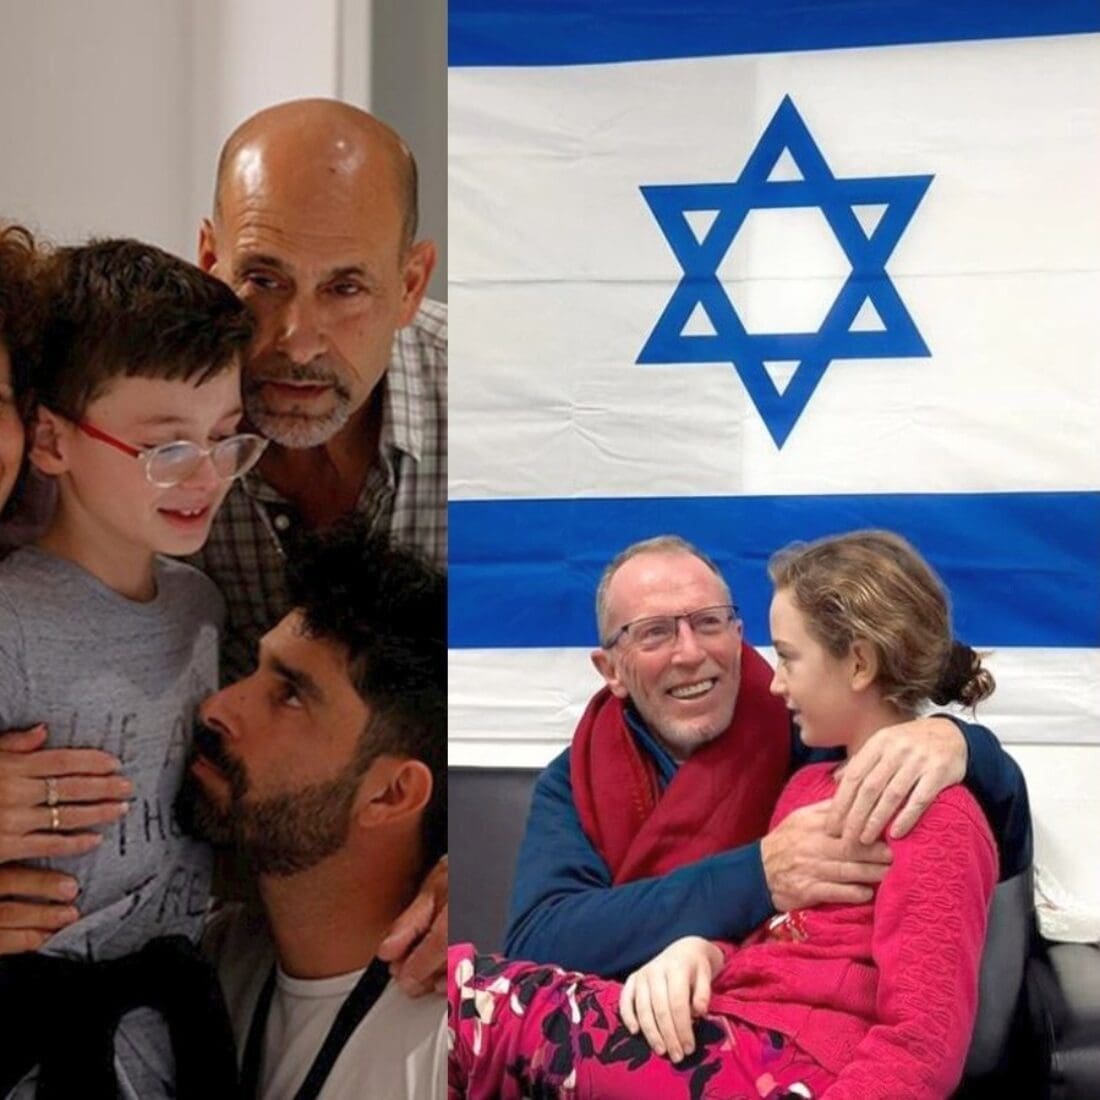 From left, nine-year-old Ehud Munder, nine-year-old Emily Hand and six-year-old Emilia Aloni were released from Hamas captivity. Photos courtesy of Schneider Children’s Hospital and IDF Spokesperson’s Unit